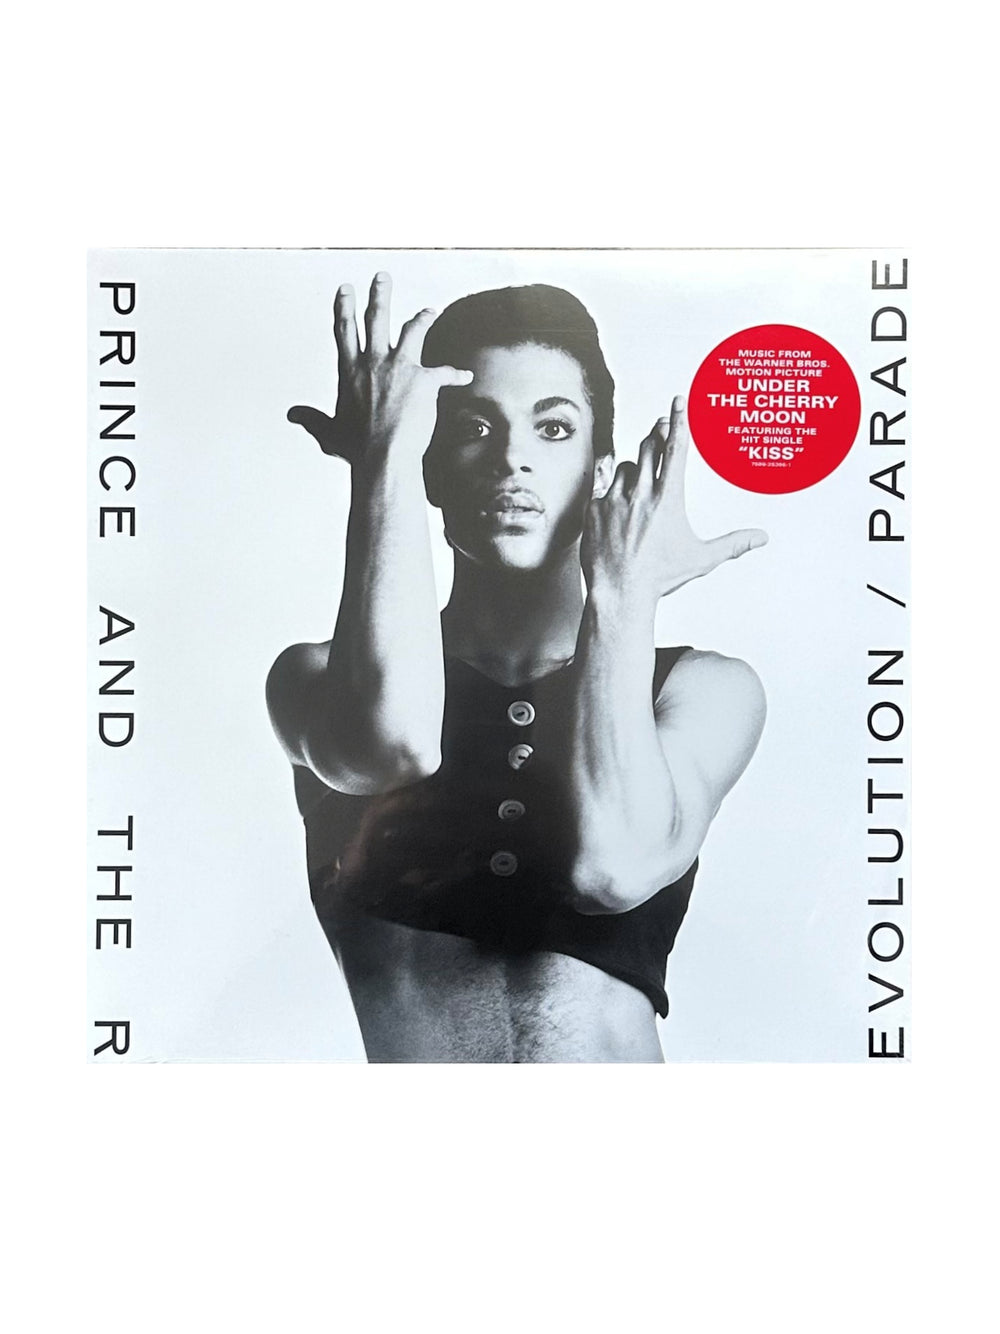 Prince – & The Revolution - Parade Music From The Motion Picture Under The Cherry Moon Vinyl Reissue Album NEW 2016